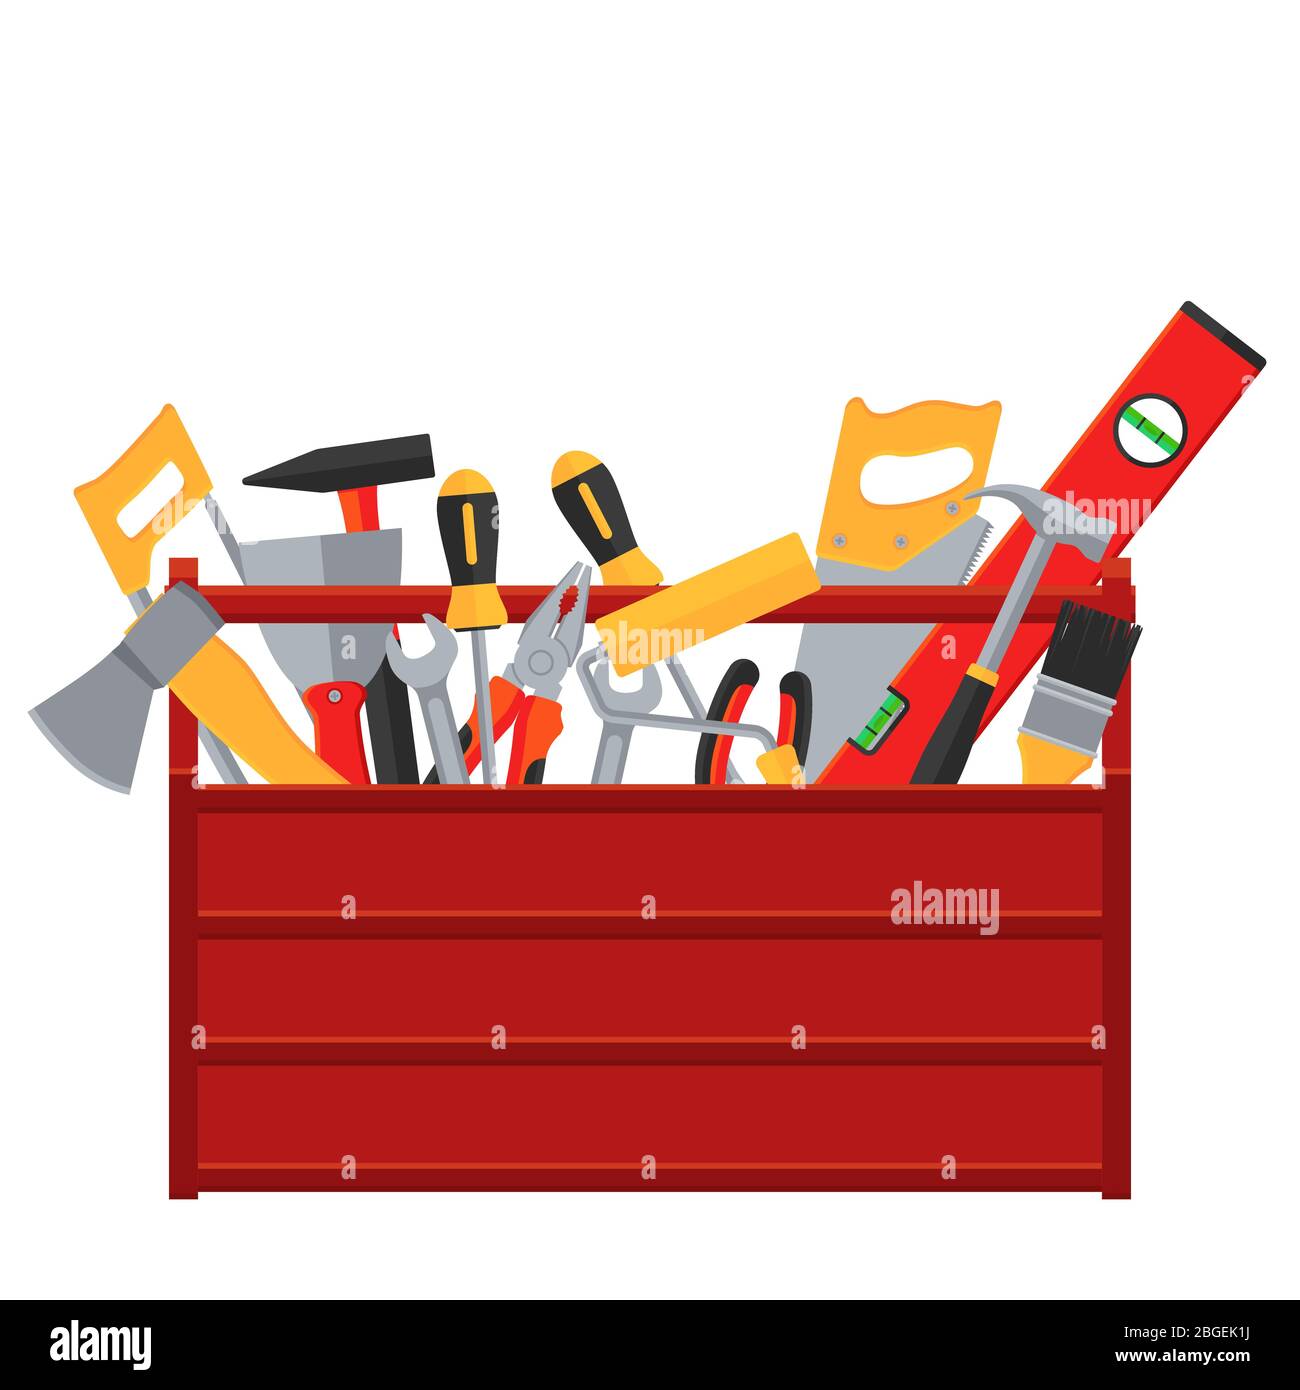 Toolbox Stock Vector Images - Alamy